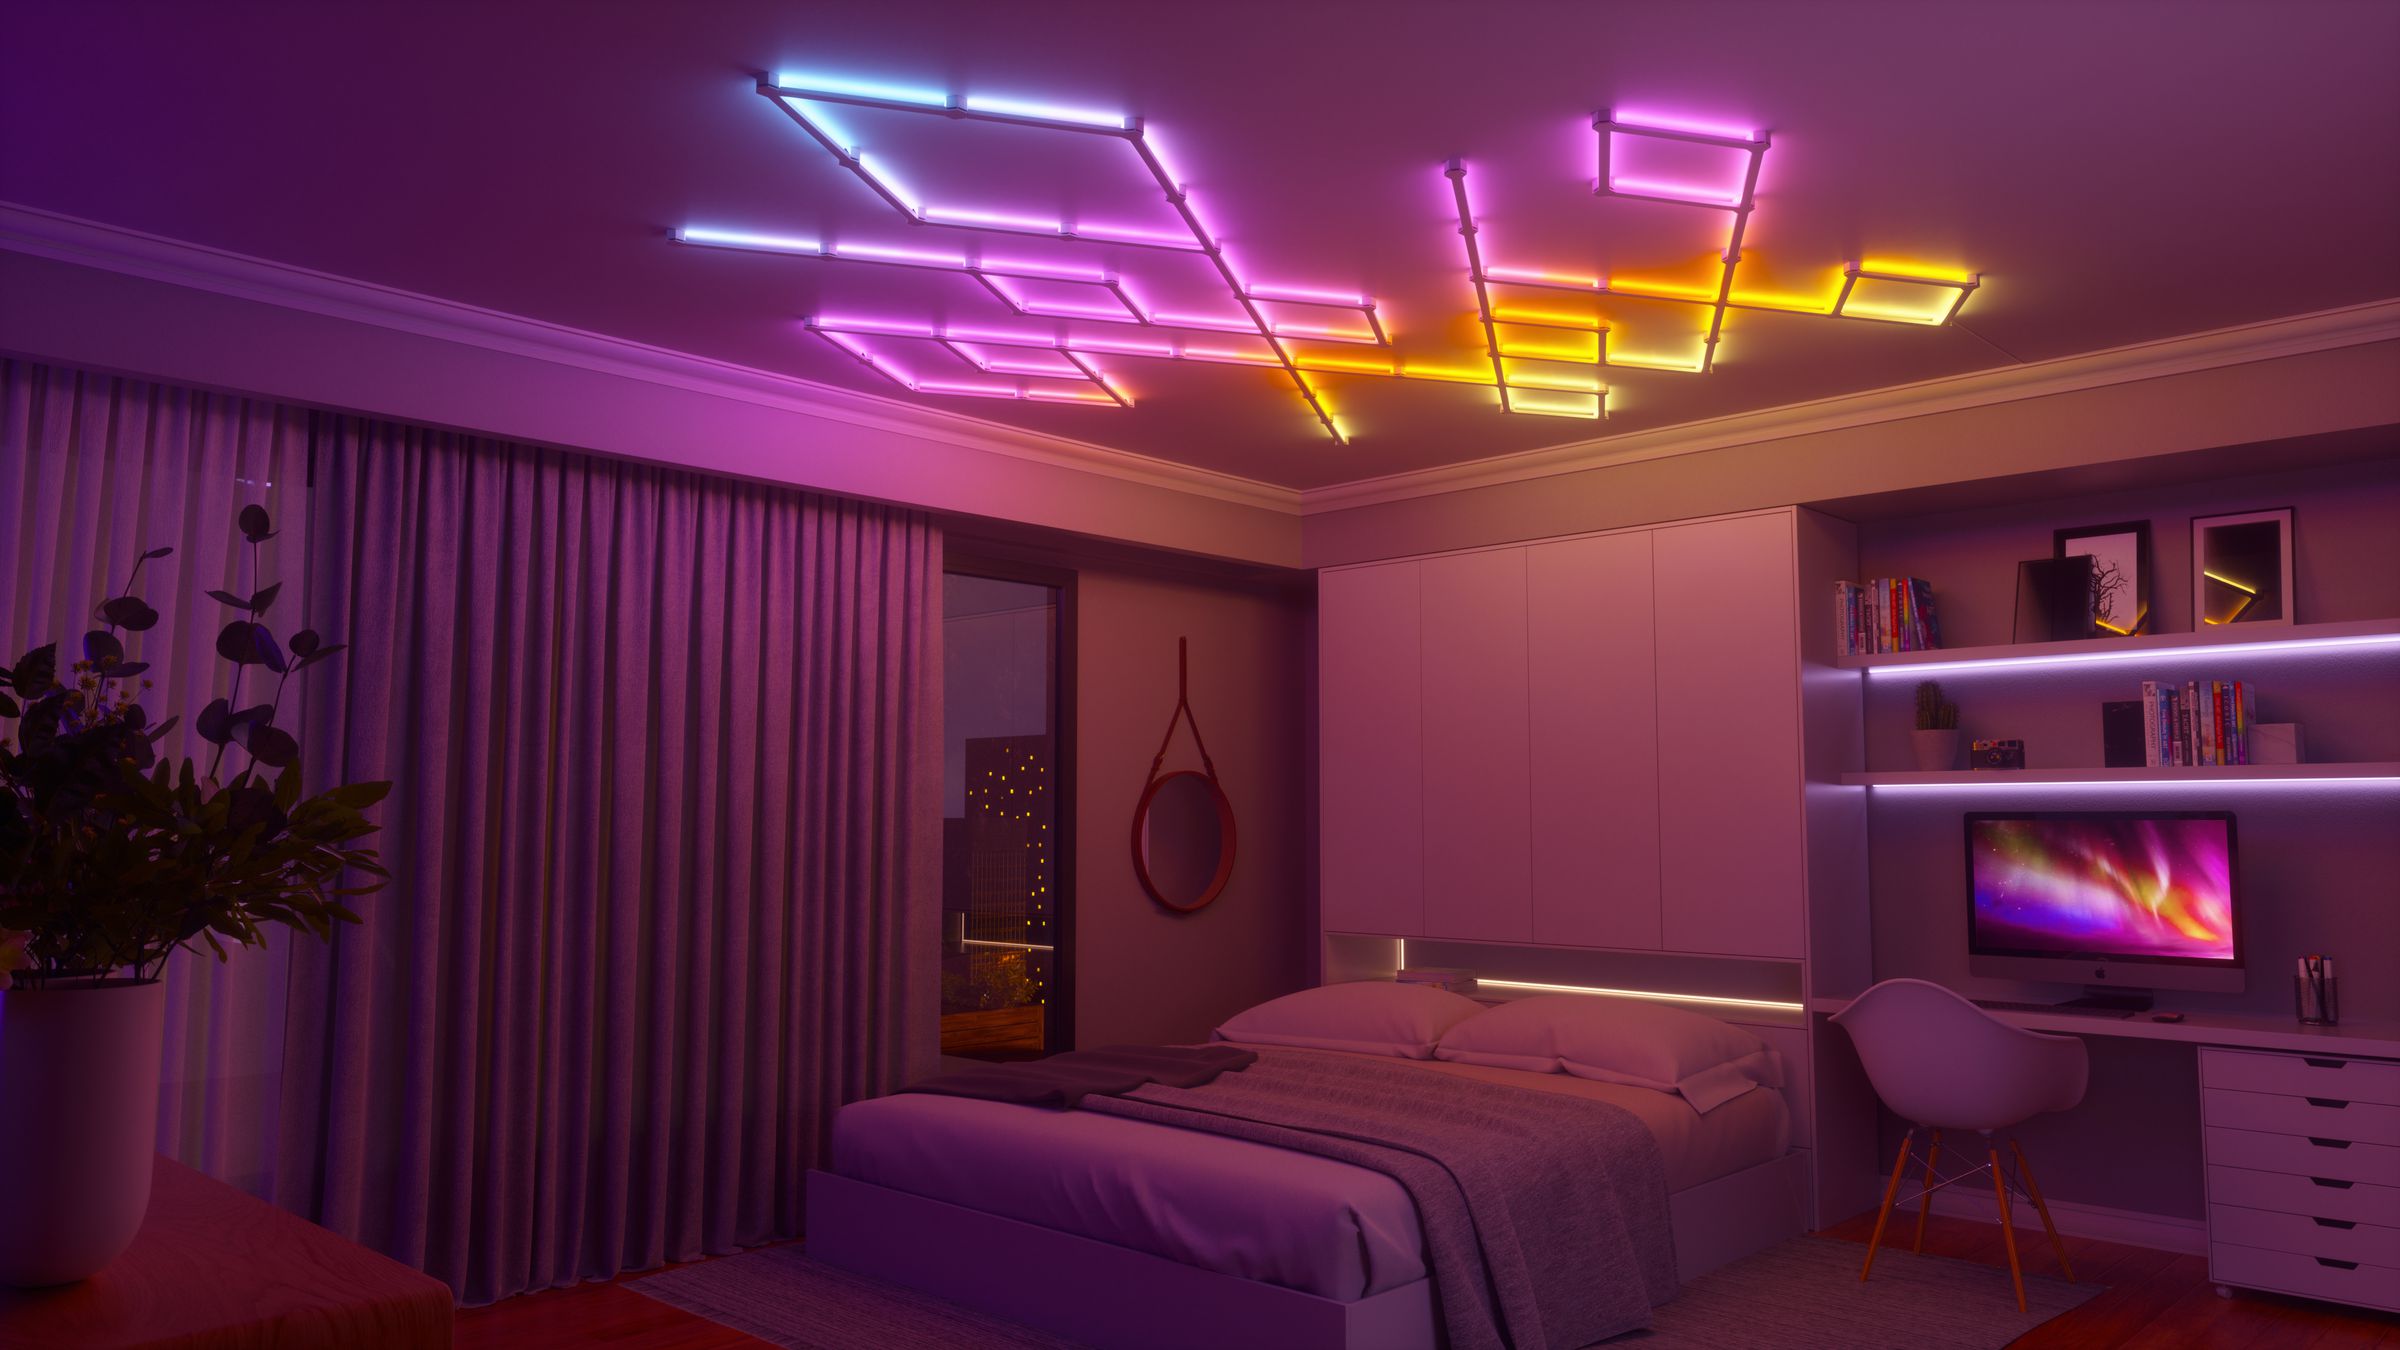 Nanoleaf Lines are modular light panels that can be mounted on the wall or ceiling.